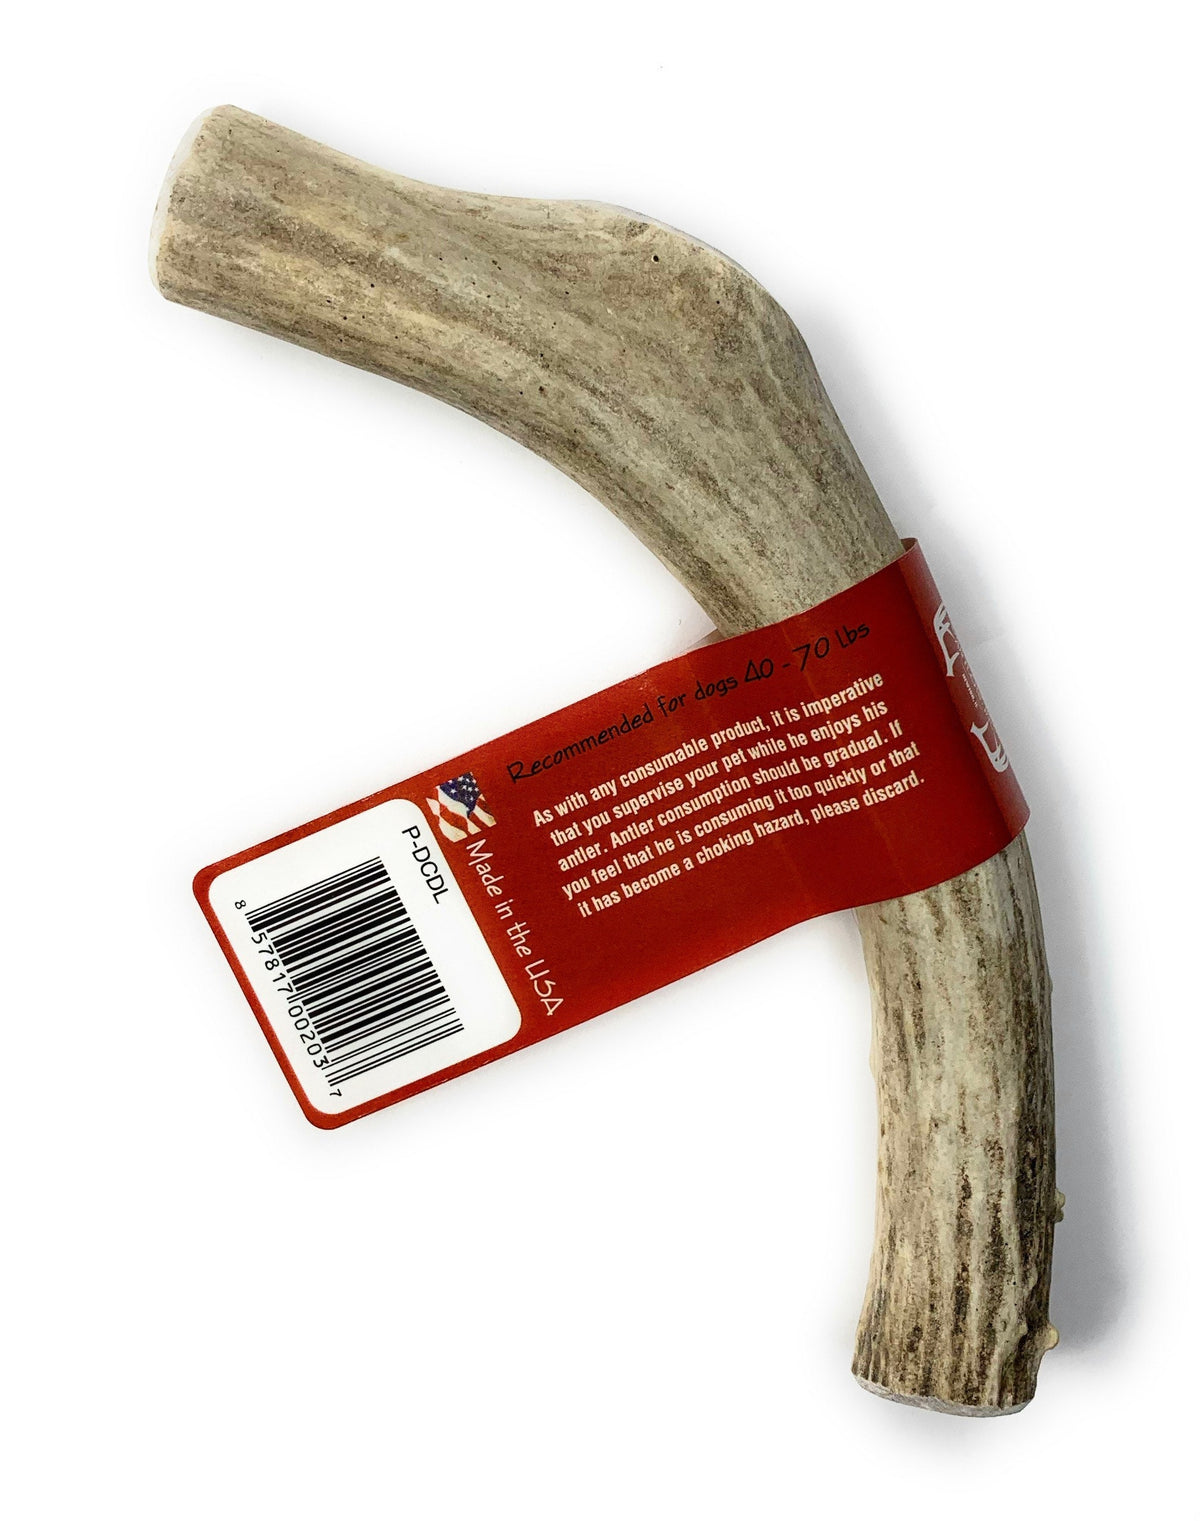 Large Deer Antler-All Natural, Grade A, Premium Antler Dog Treats, Organic Dog Chews, Naturally Shed Antlers from USA